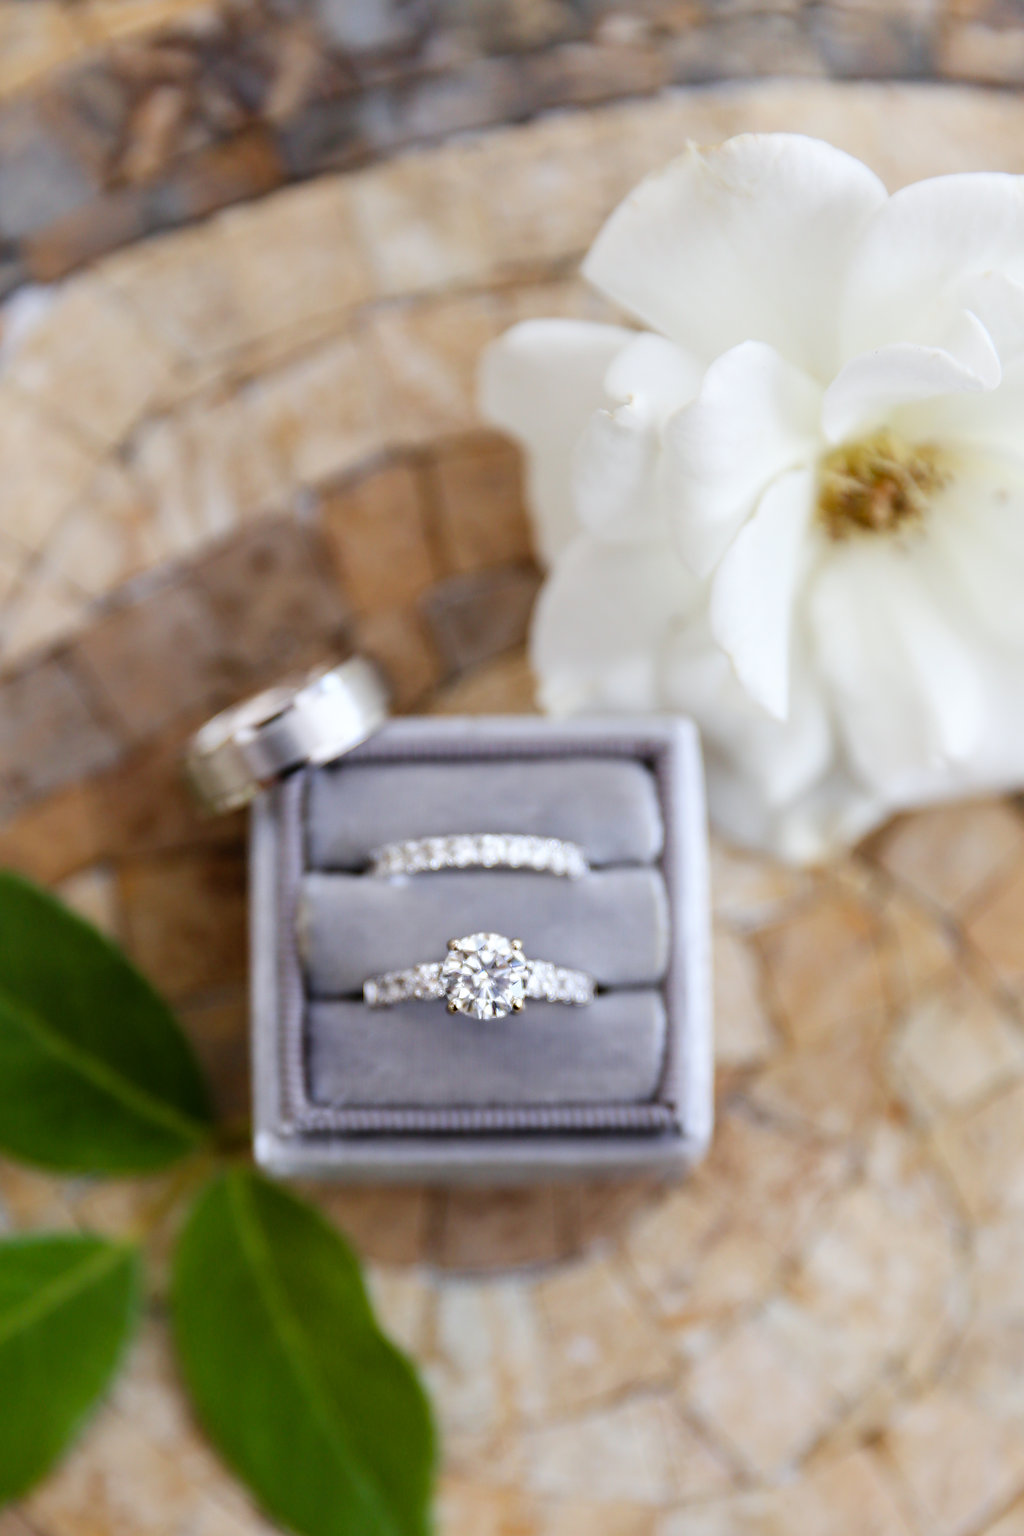 Gorgeous Solitaire Wedding Rings - Gorgeous Seal Beach Wedding Venue - Old Country Club Wedding